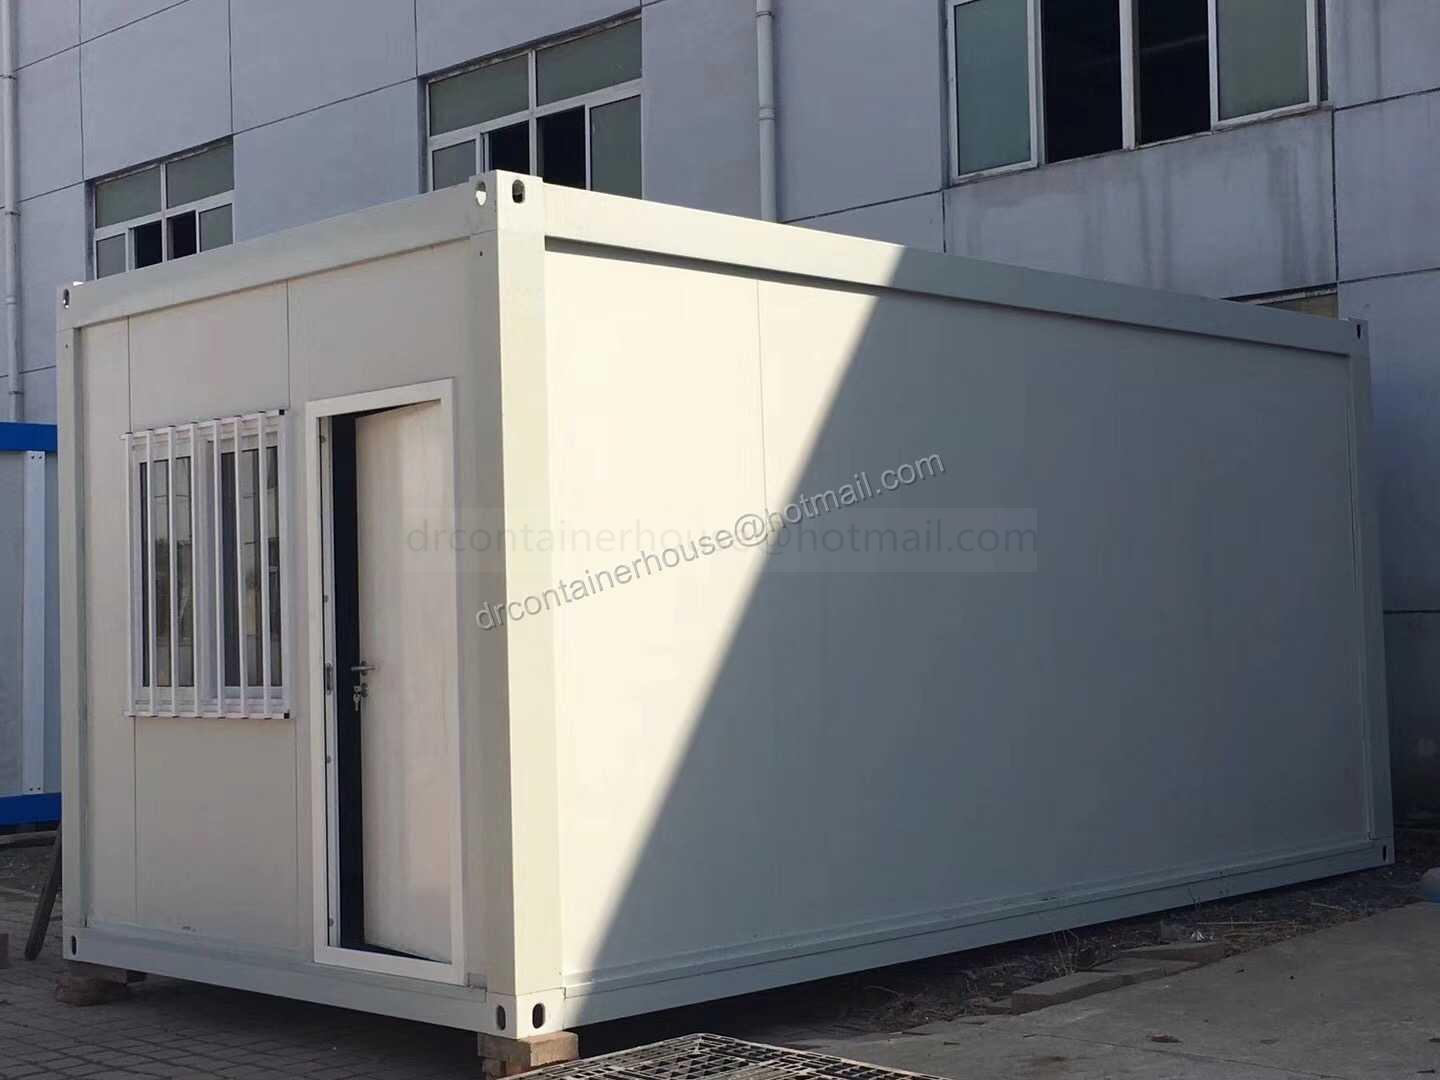 china lowes precast 40ft home <a href=container frame target='_blank'>container frame</a> house luxury